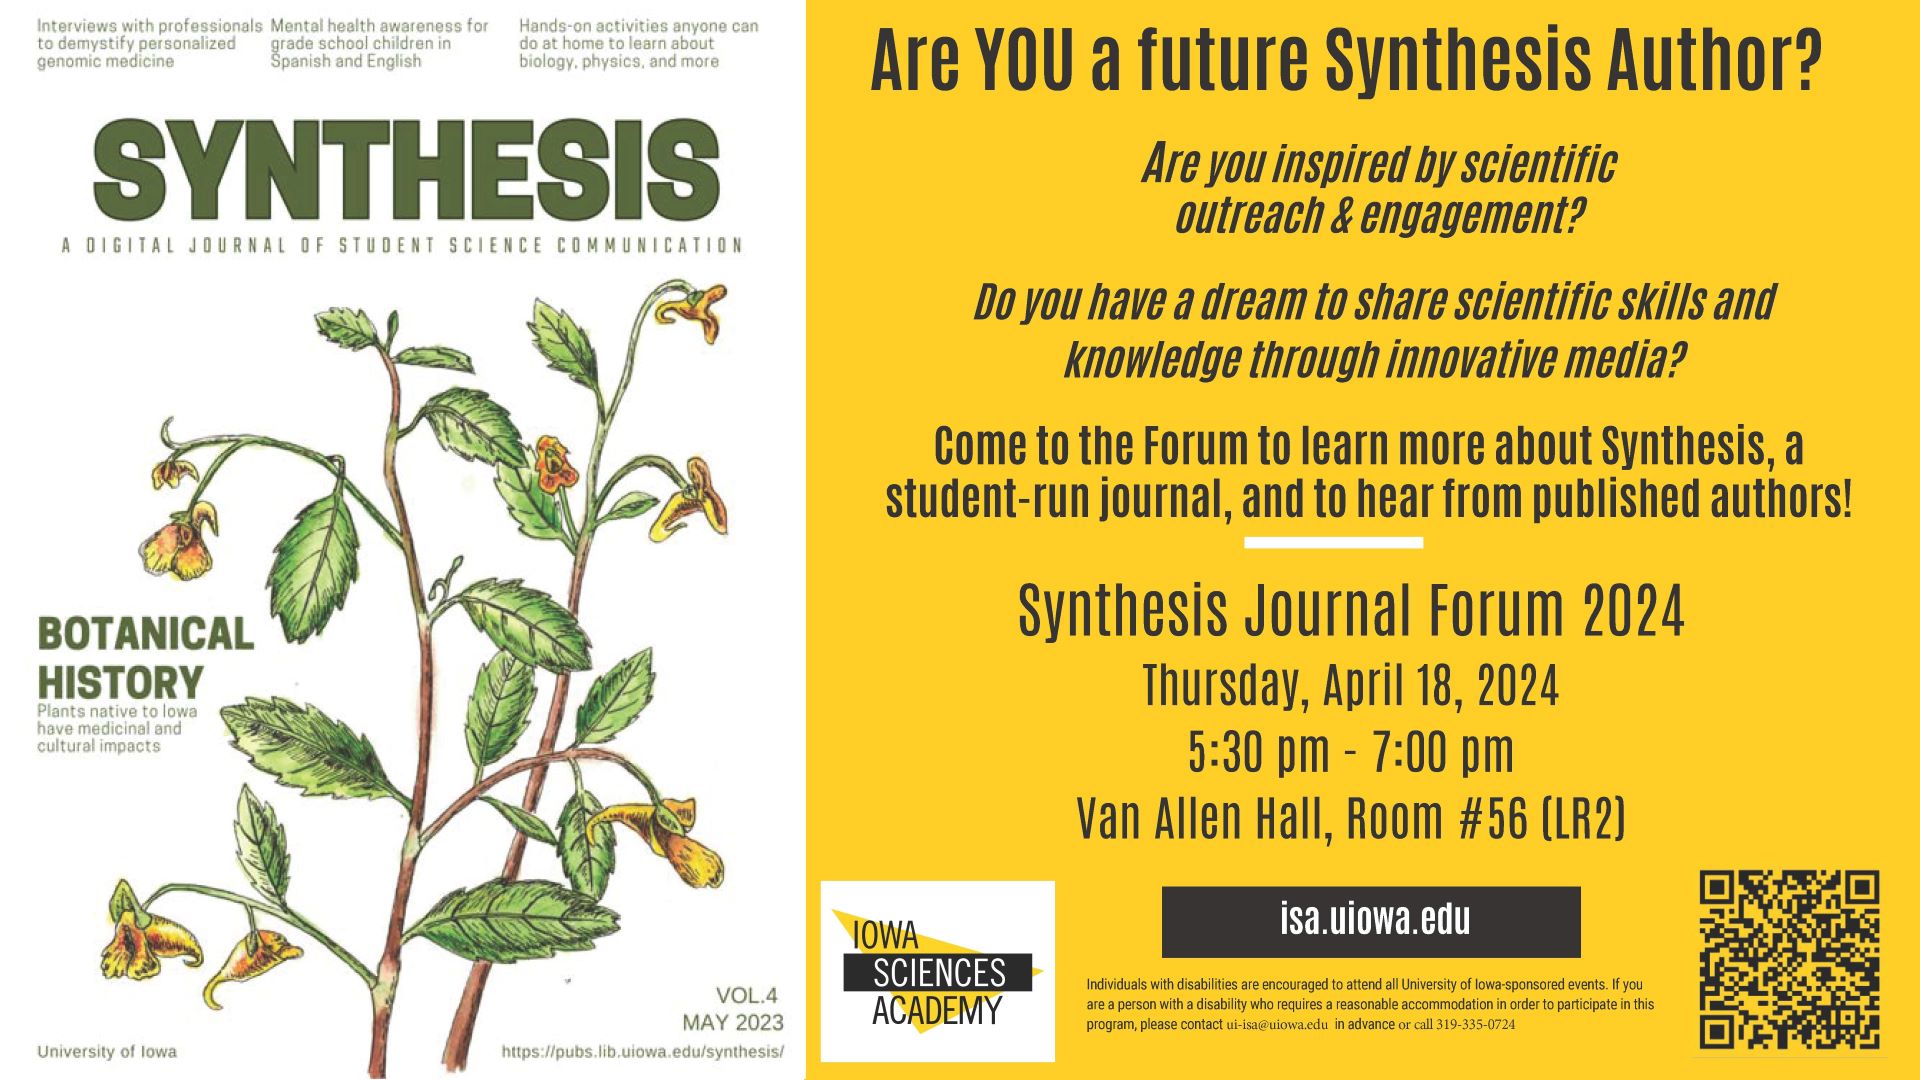 Synthesis journal forum slide event on April 18